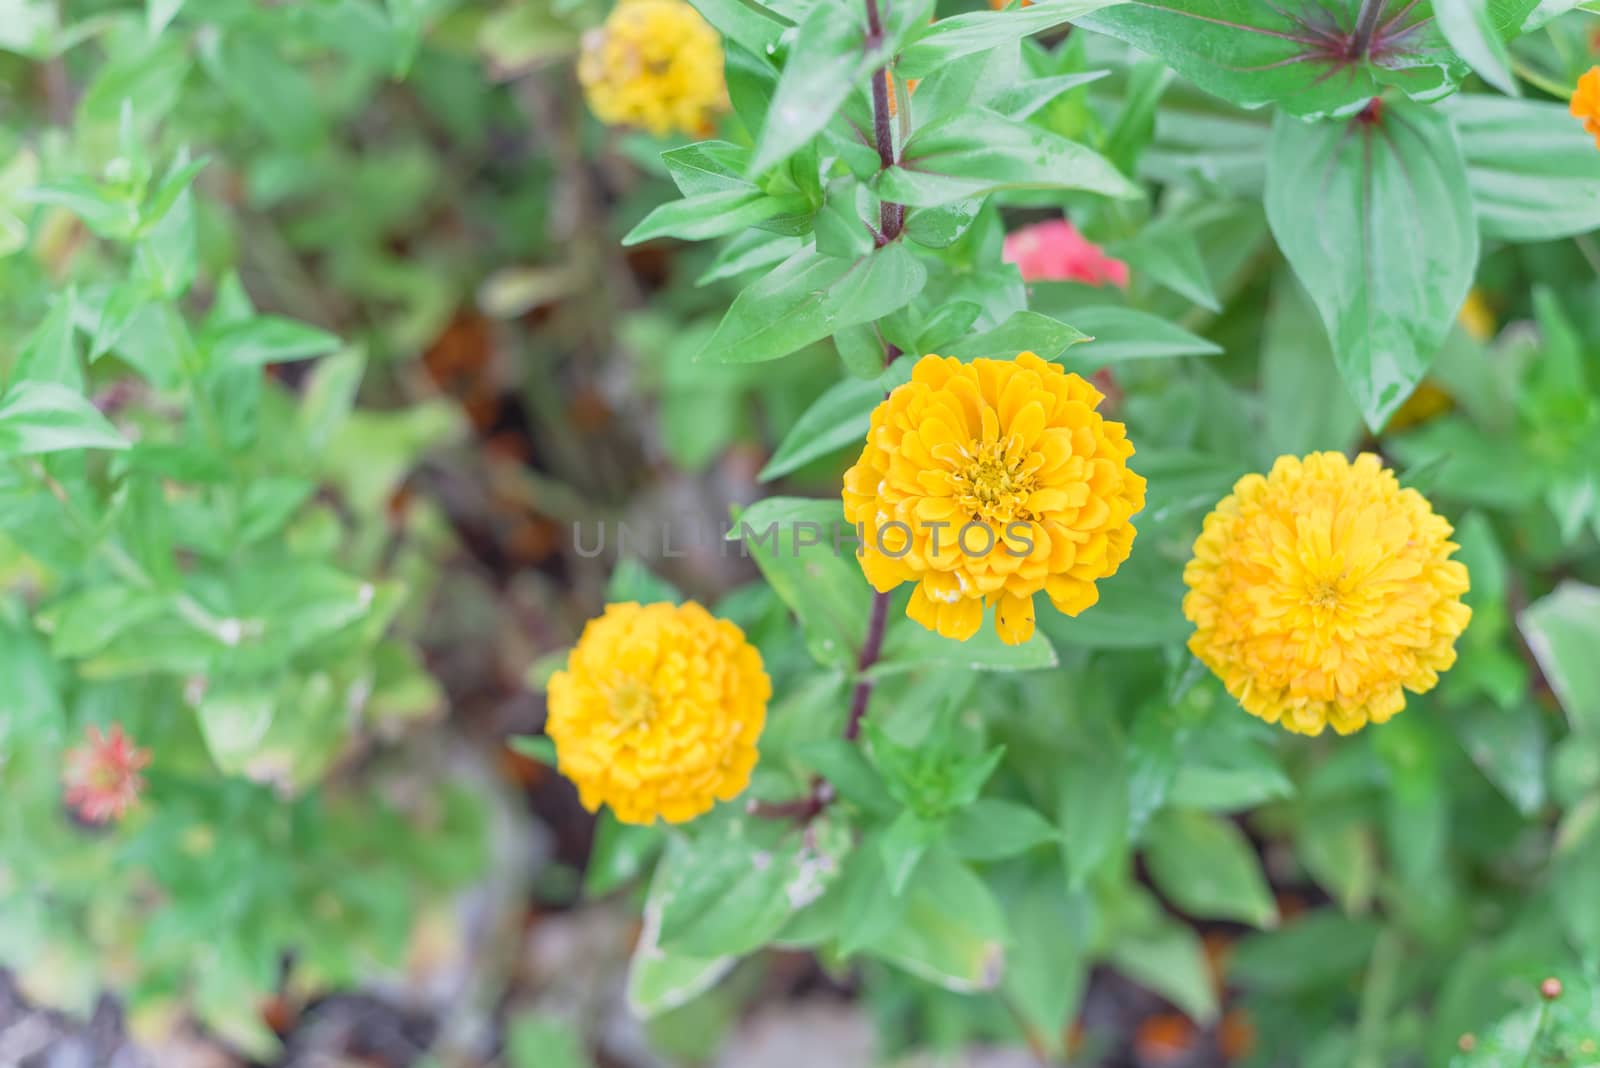 Yellow blooming zinnia bush at flower bed in community garden near Dallas, Texas, America. Zinnia is a genus of plants of sunflower tribe within daisy family